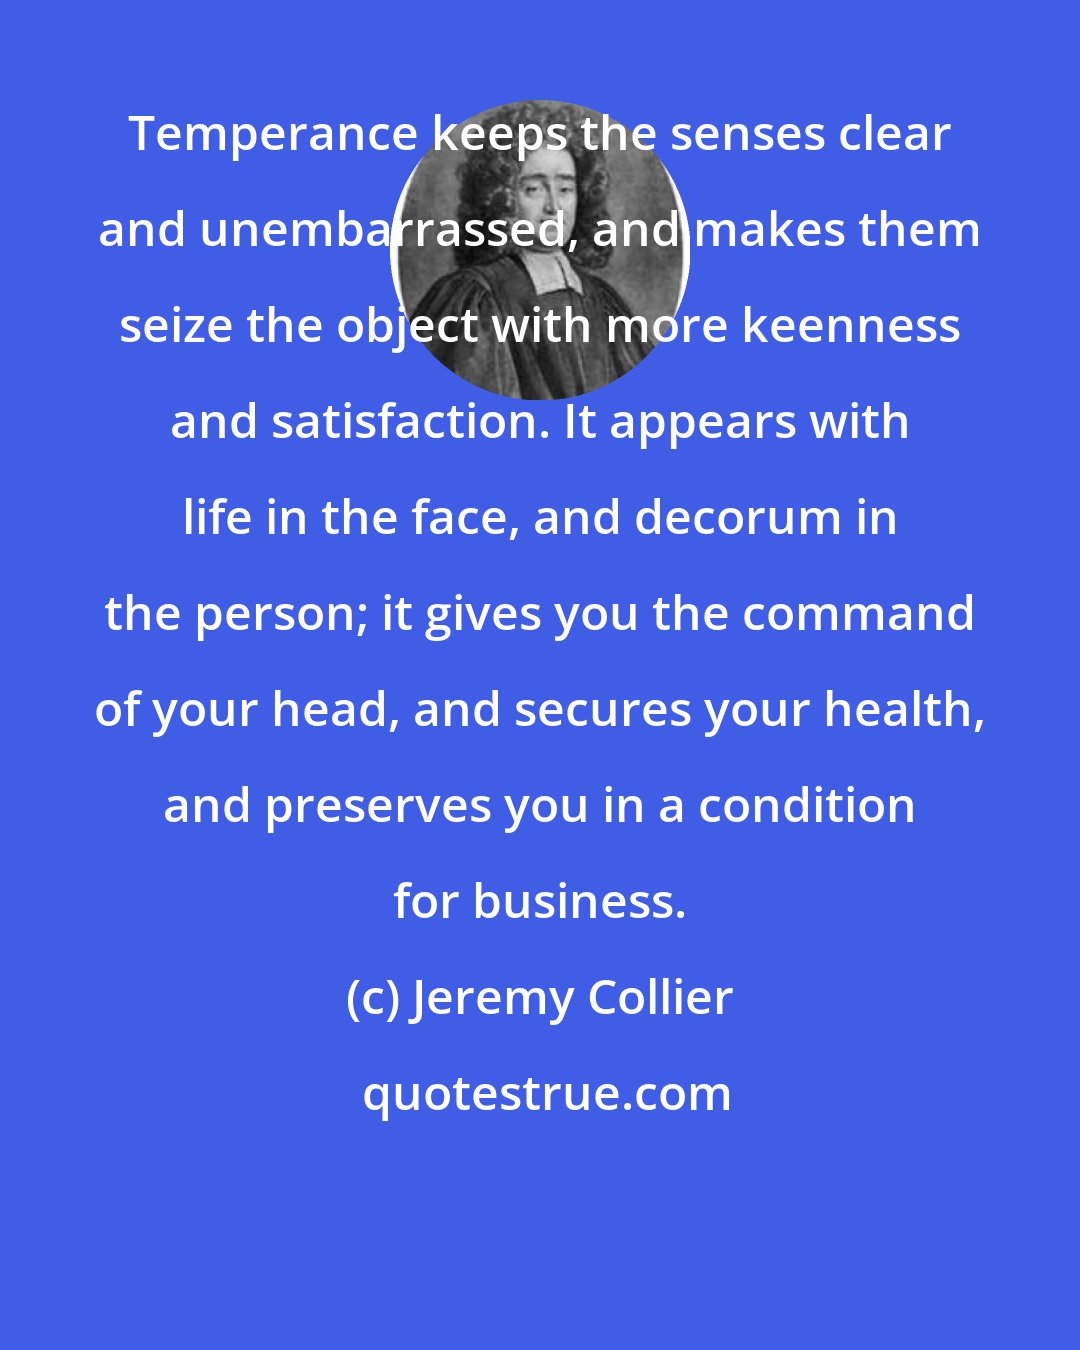 Jeremy Collier: Temperance keeps the senses clear and unembarrassed, and makes them seize the object with more keenness and satisfaction. It appears with life in the face, and decorum in the person; it gives you the command of your head, and secures your health, and preserves you in a condition for business.